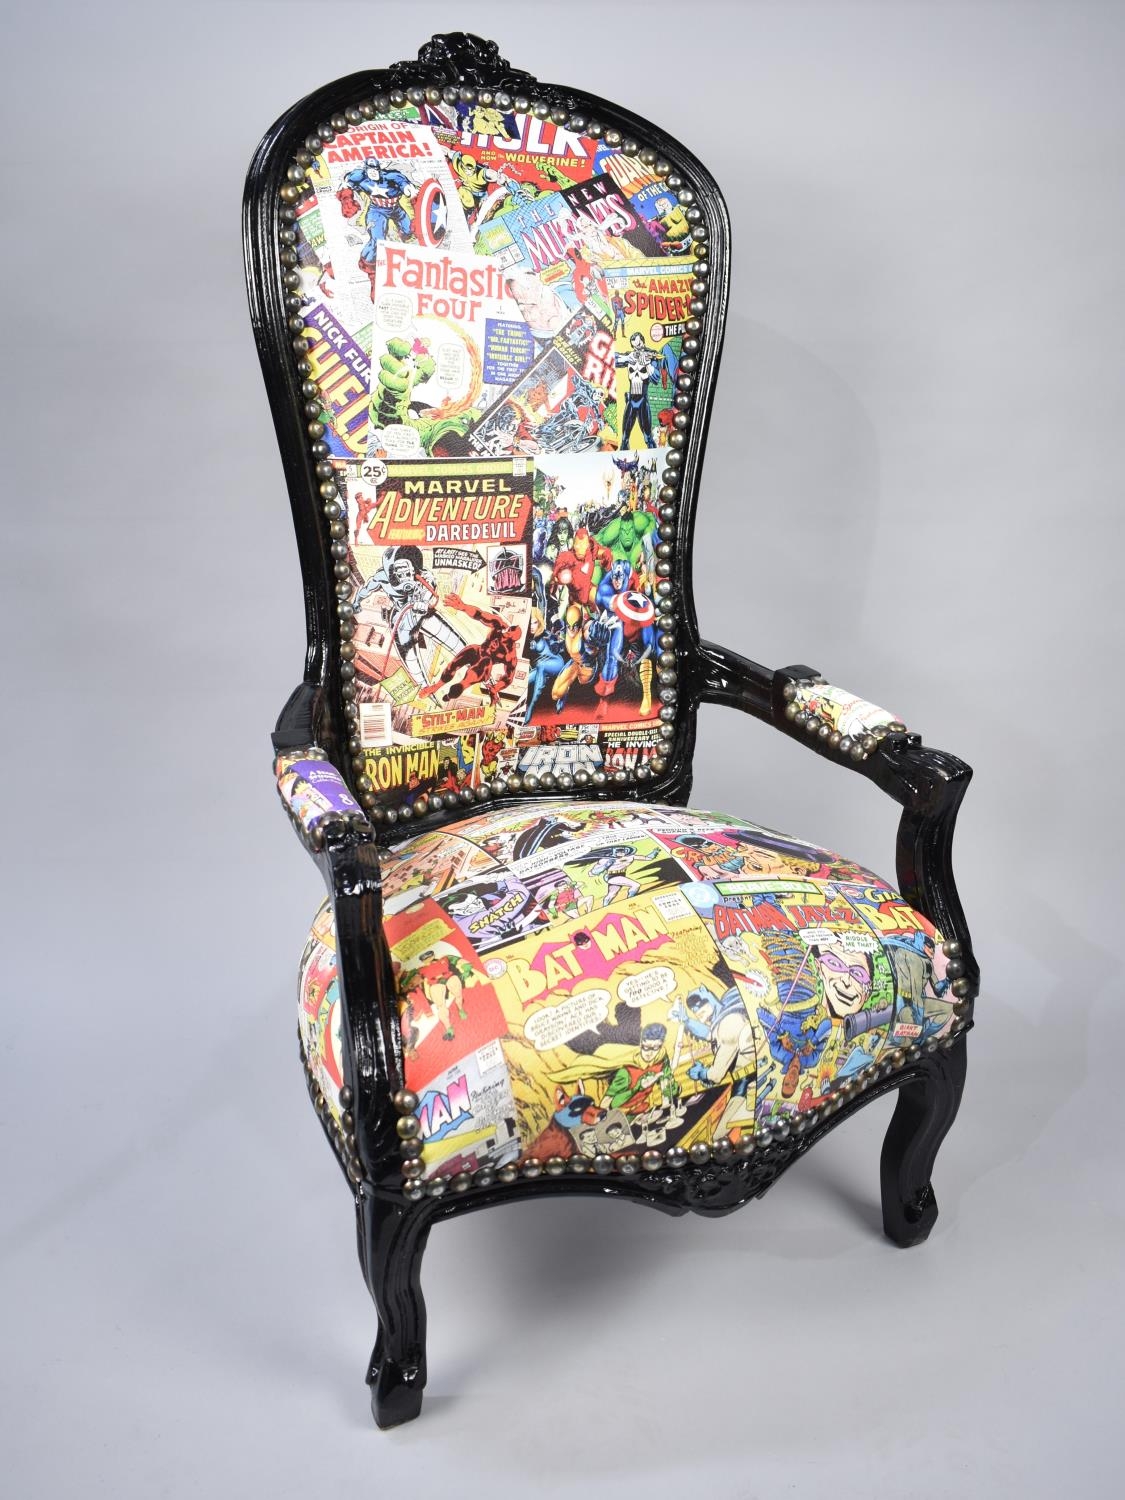 A Victorian Style Chair Upholstered in Comic Book Fabric